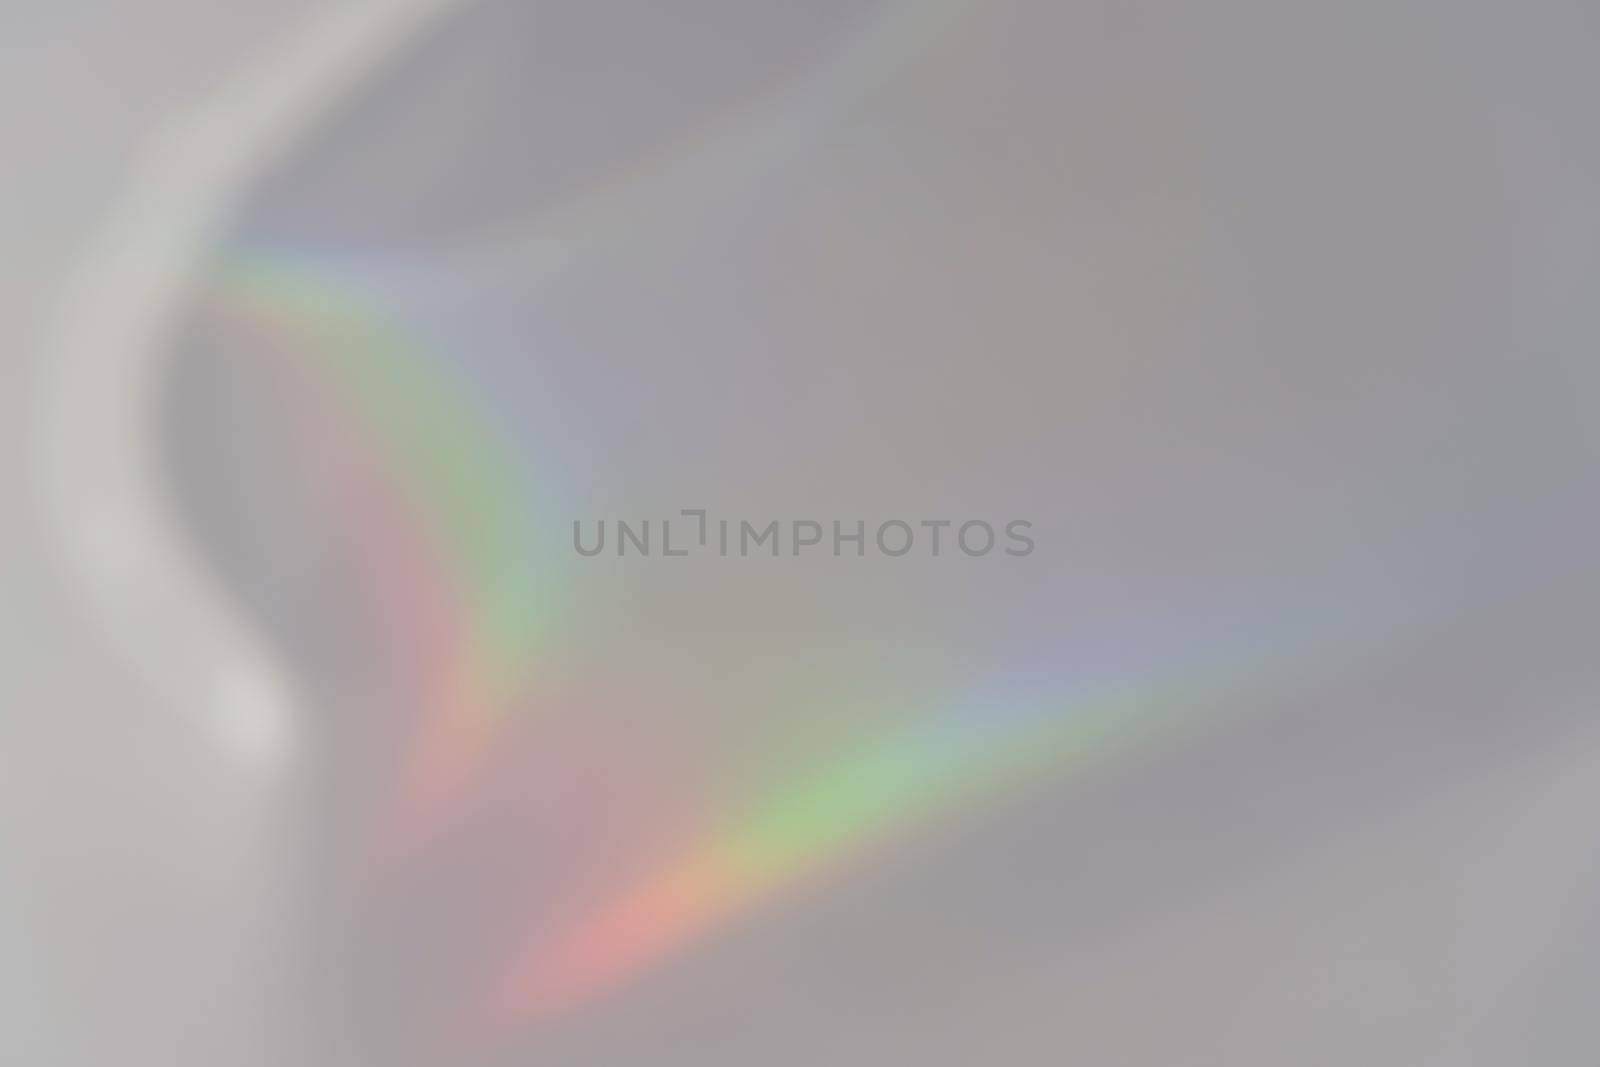 Abstract natural light refraction silhouette on water surface mock up.Caustic effect light refraction on white wall overlay photo mockup, blurred sun rays refracting through glass prism by photolime